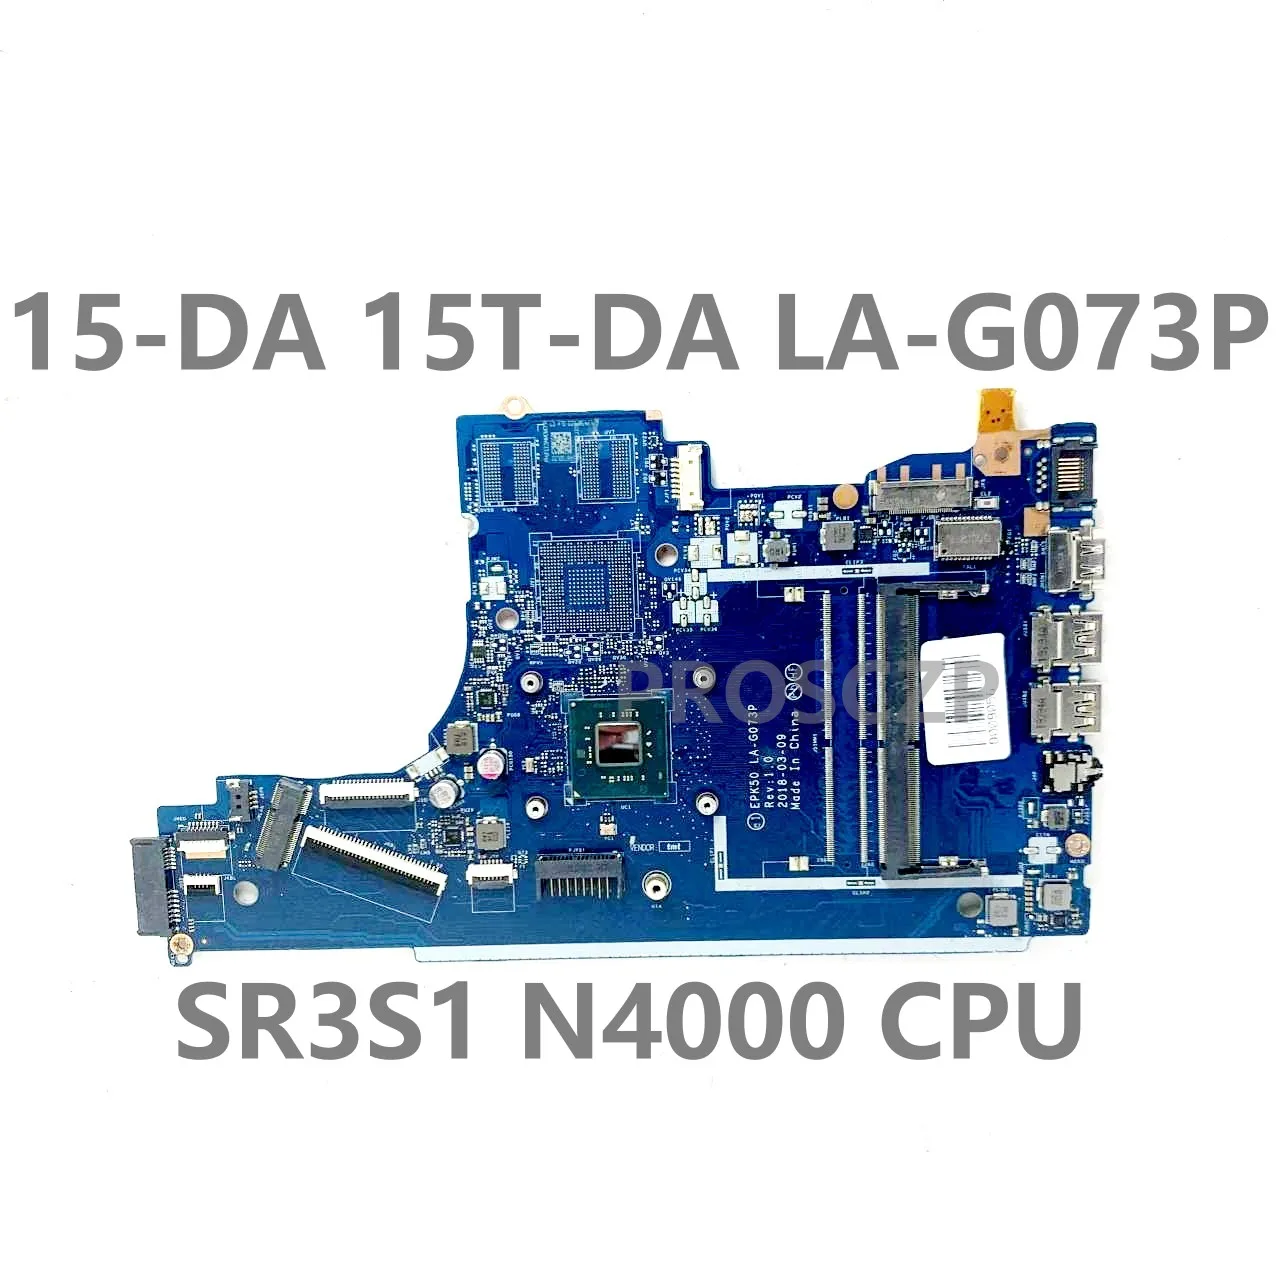 

Mainboard For HP 15-DA 15T-DA EPK50 LA-G073P High Quality Laptop Motherboard With SR3S1 N4000 CPU DDR4 100% Full Working Well